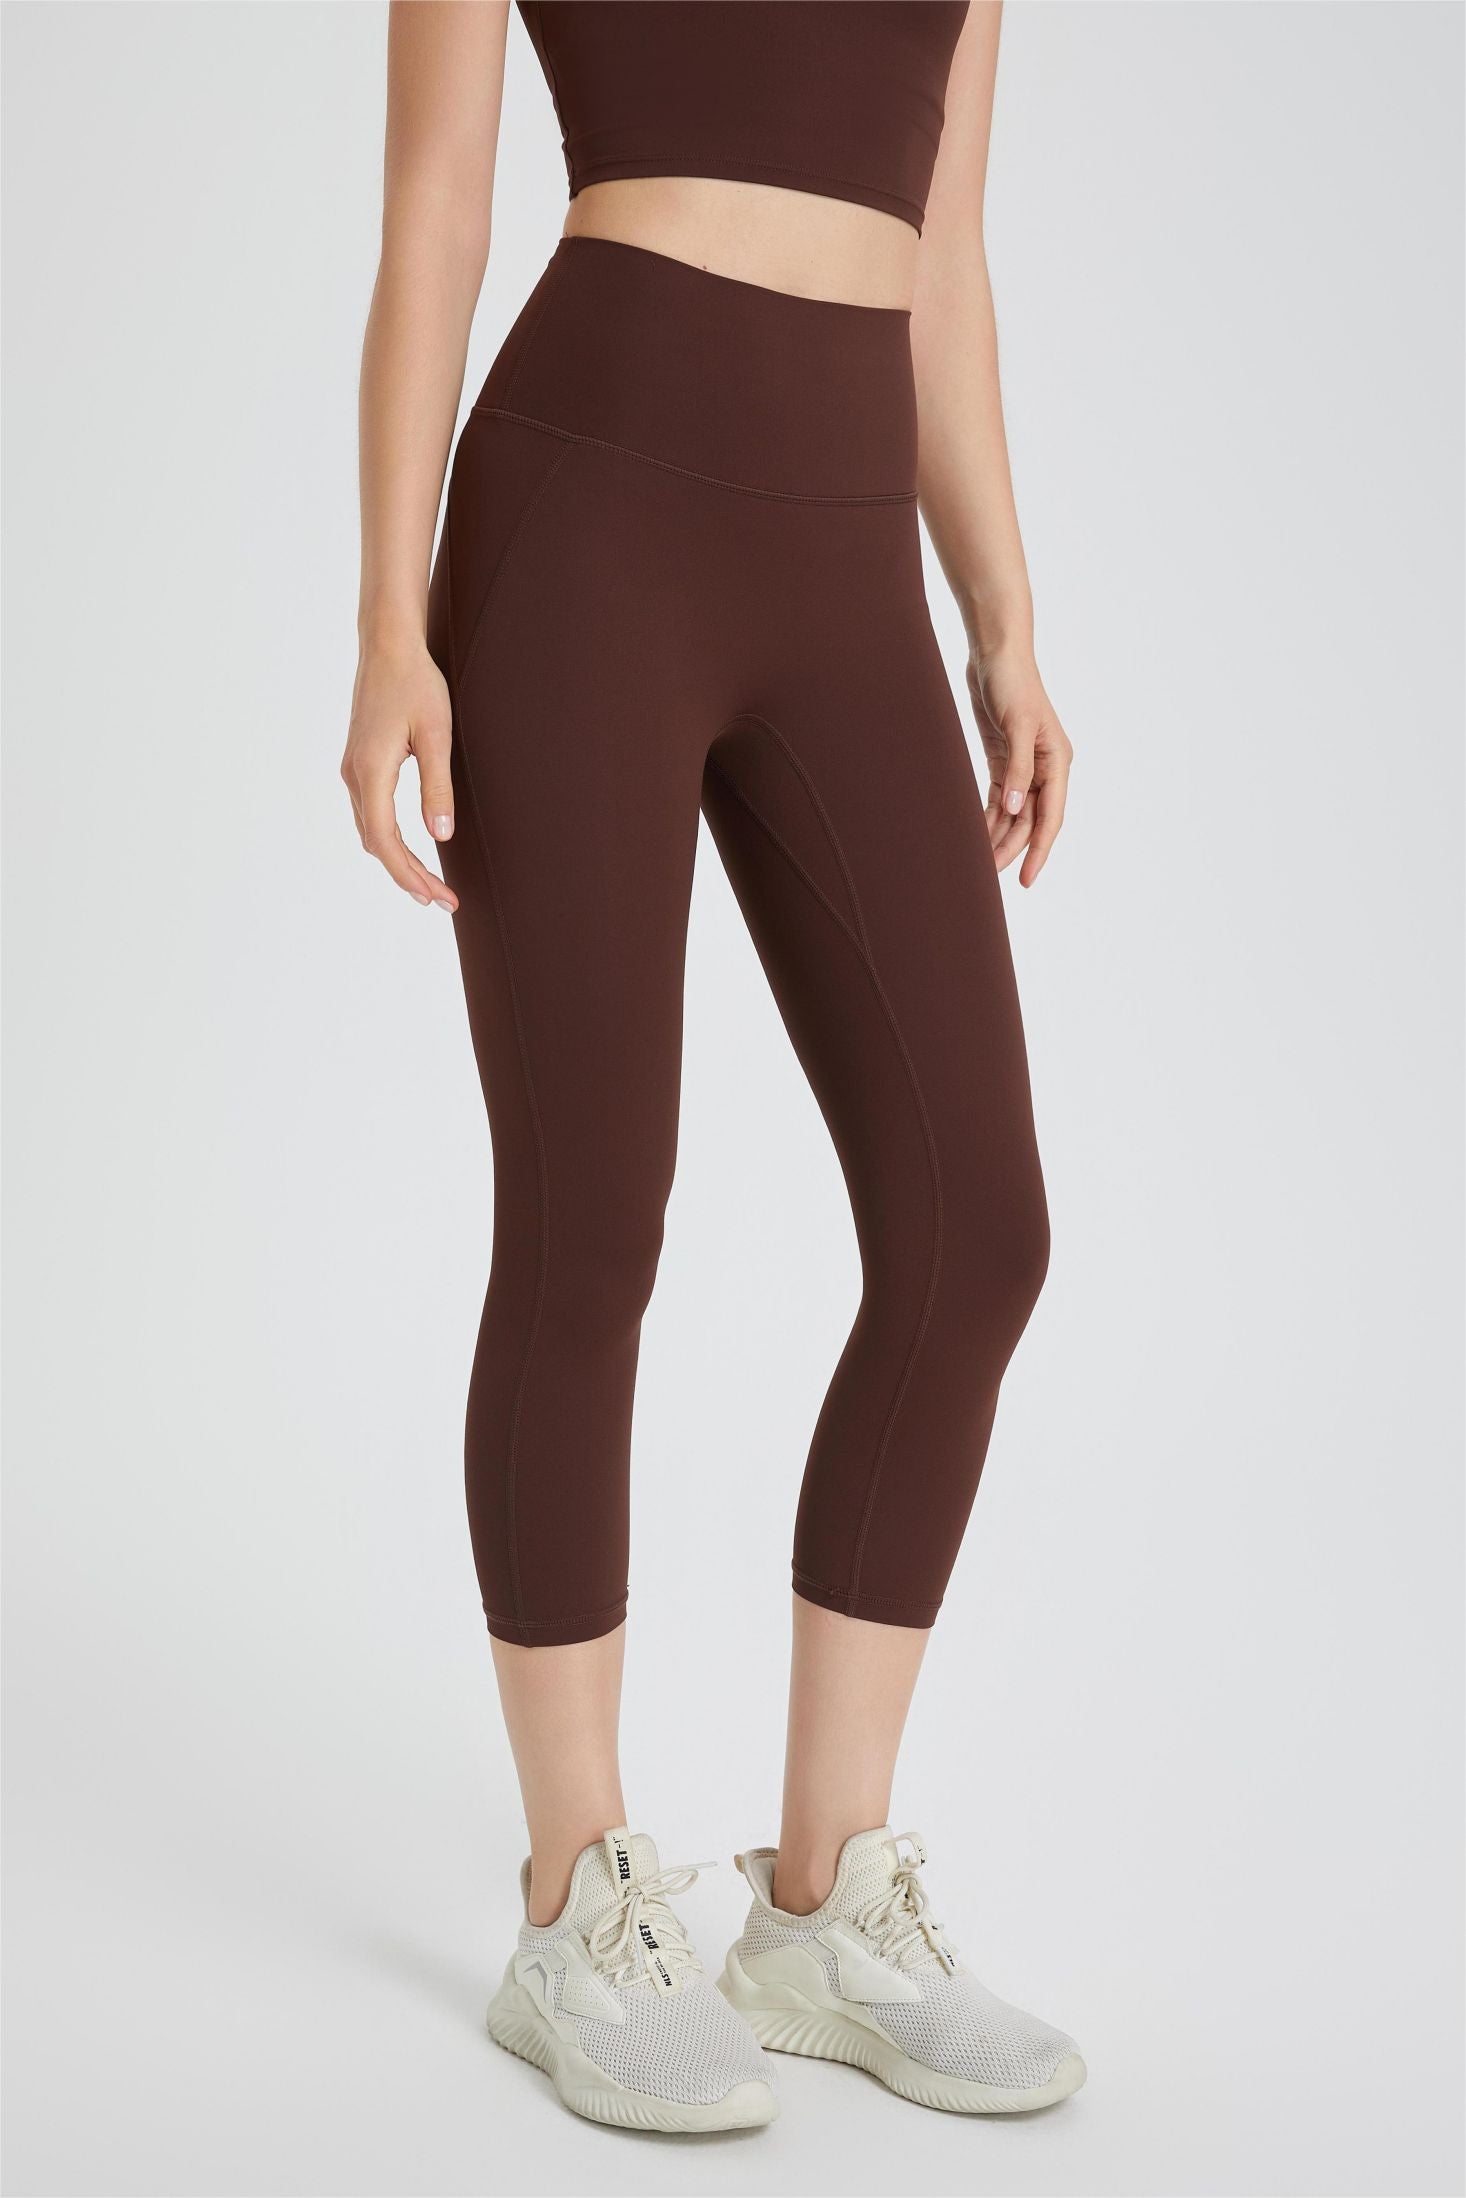 Women's Simplicity MID-Rise Capri Leggings 20' Light Olive Moves with:  Moisture-Wicking Fabric with Stretch Must-Have Features: Upf 50+ Material,  Hidden Pocket - China Sports Leggings and Yoga Leggings price